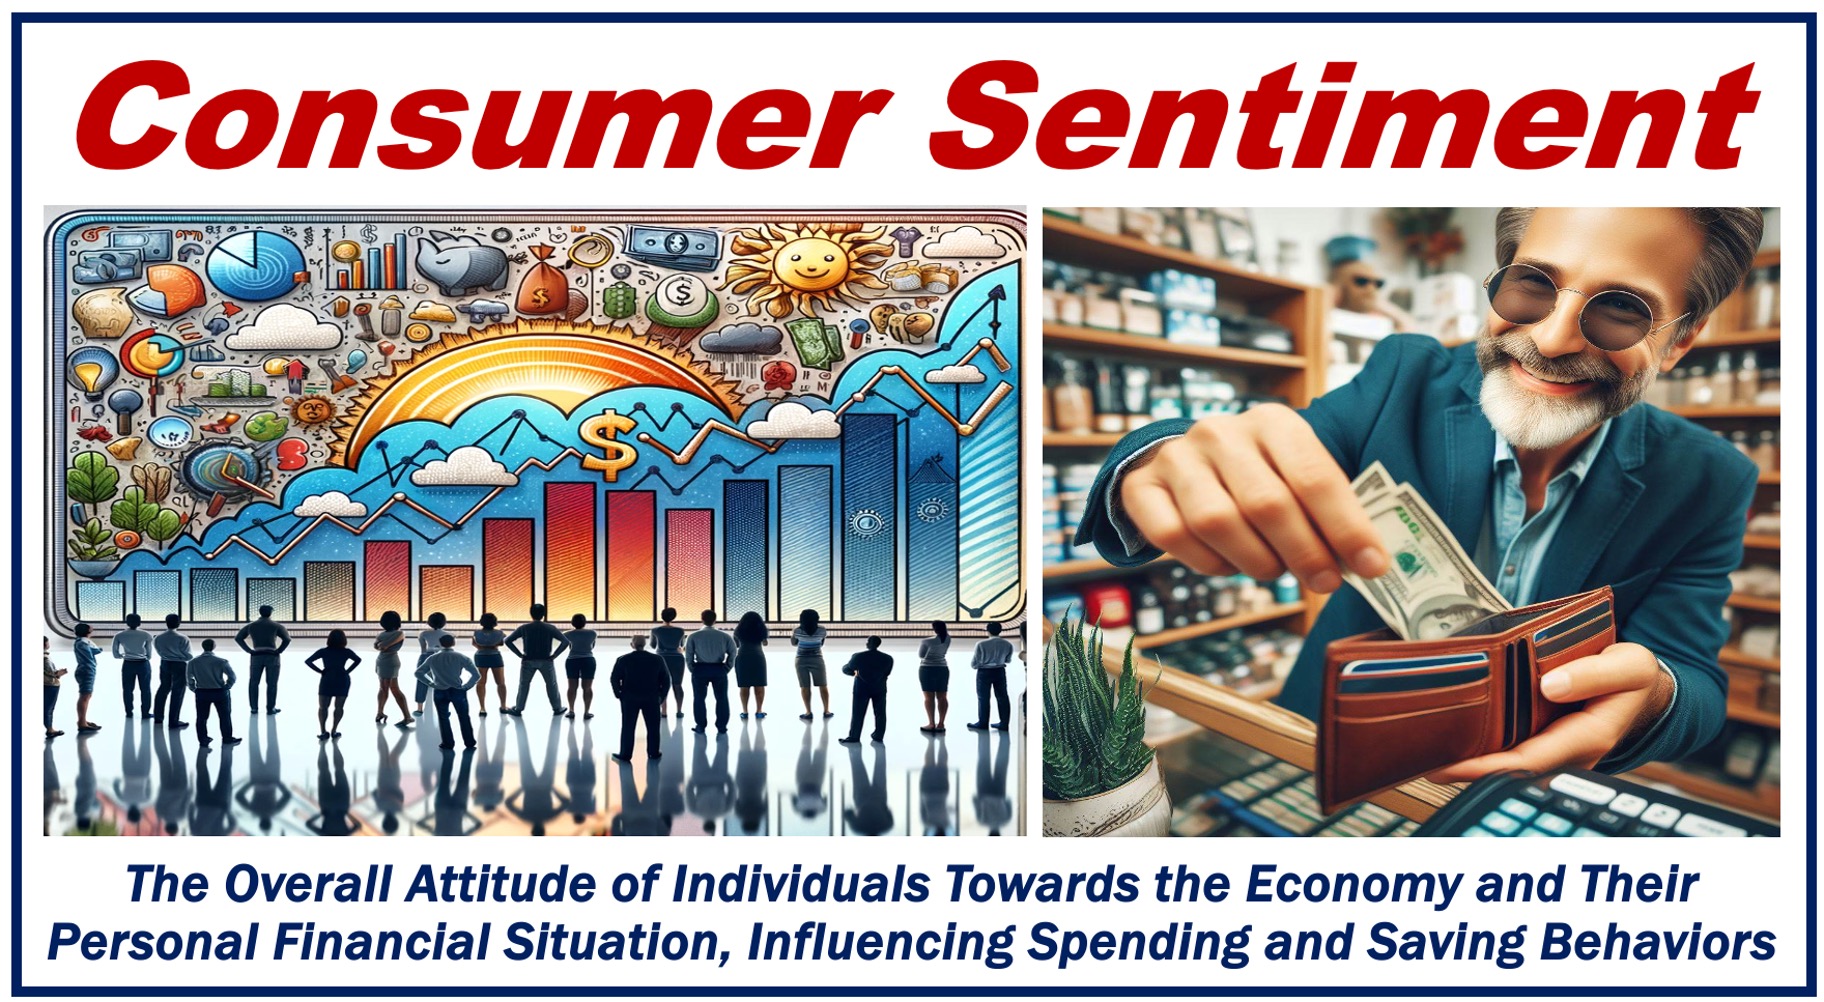 Two images of consumers plus the meaning of consumer sentiment.